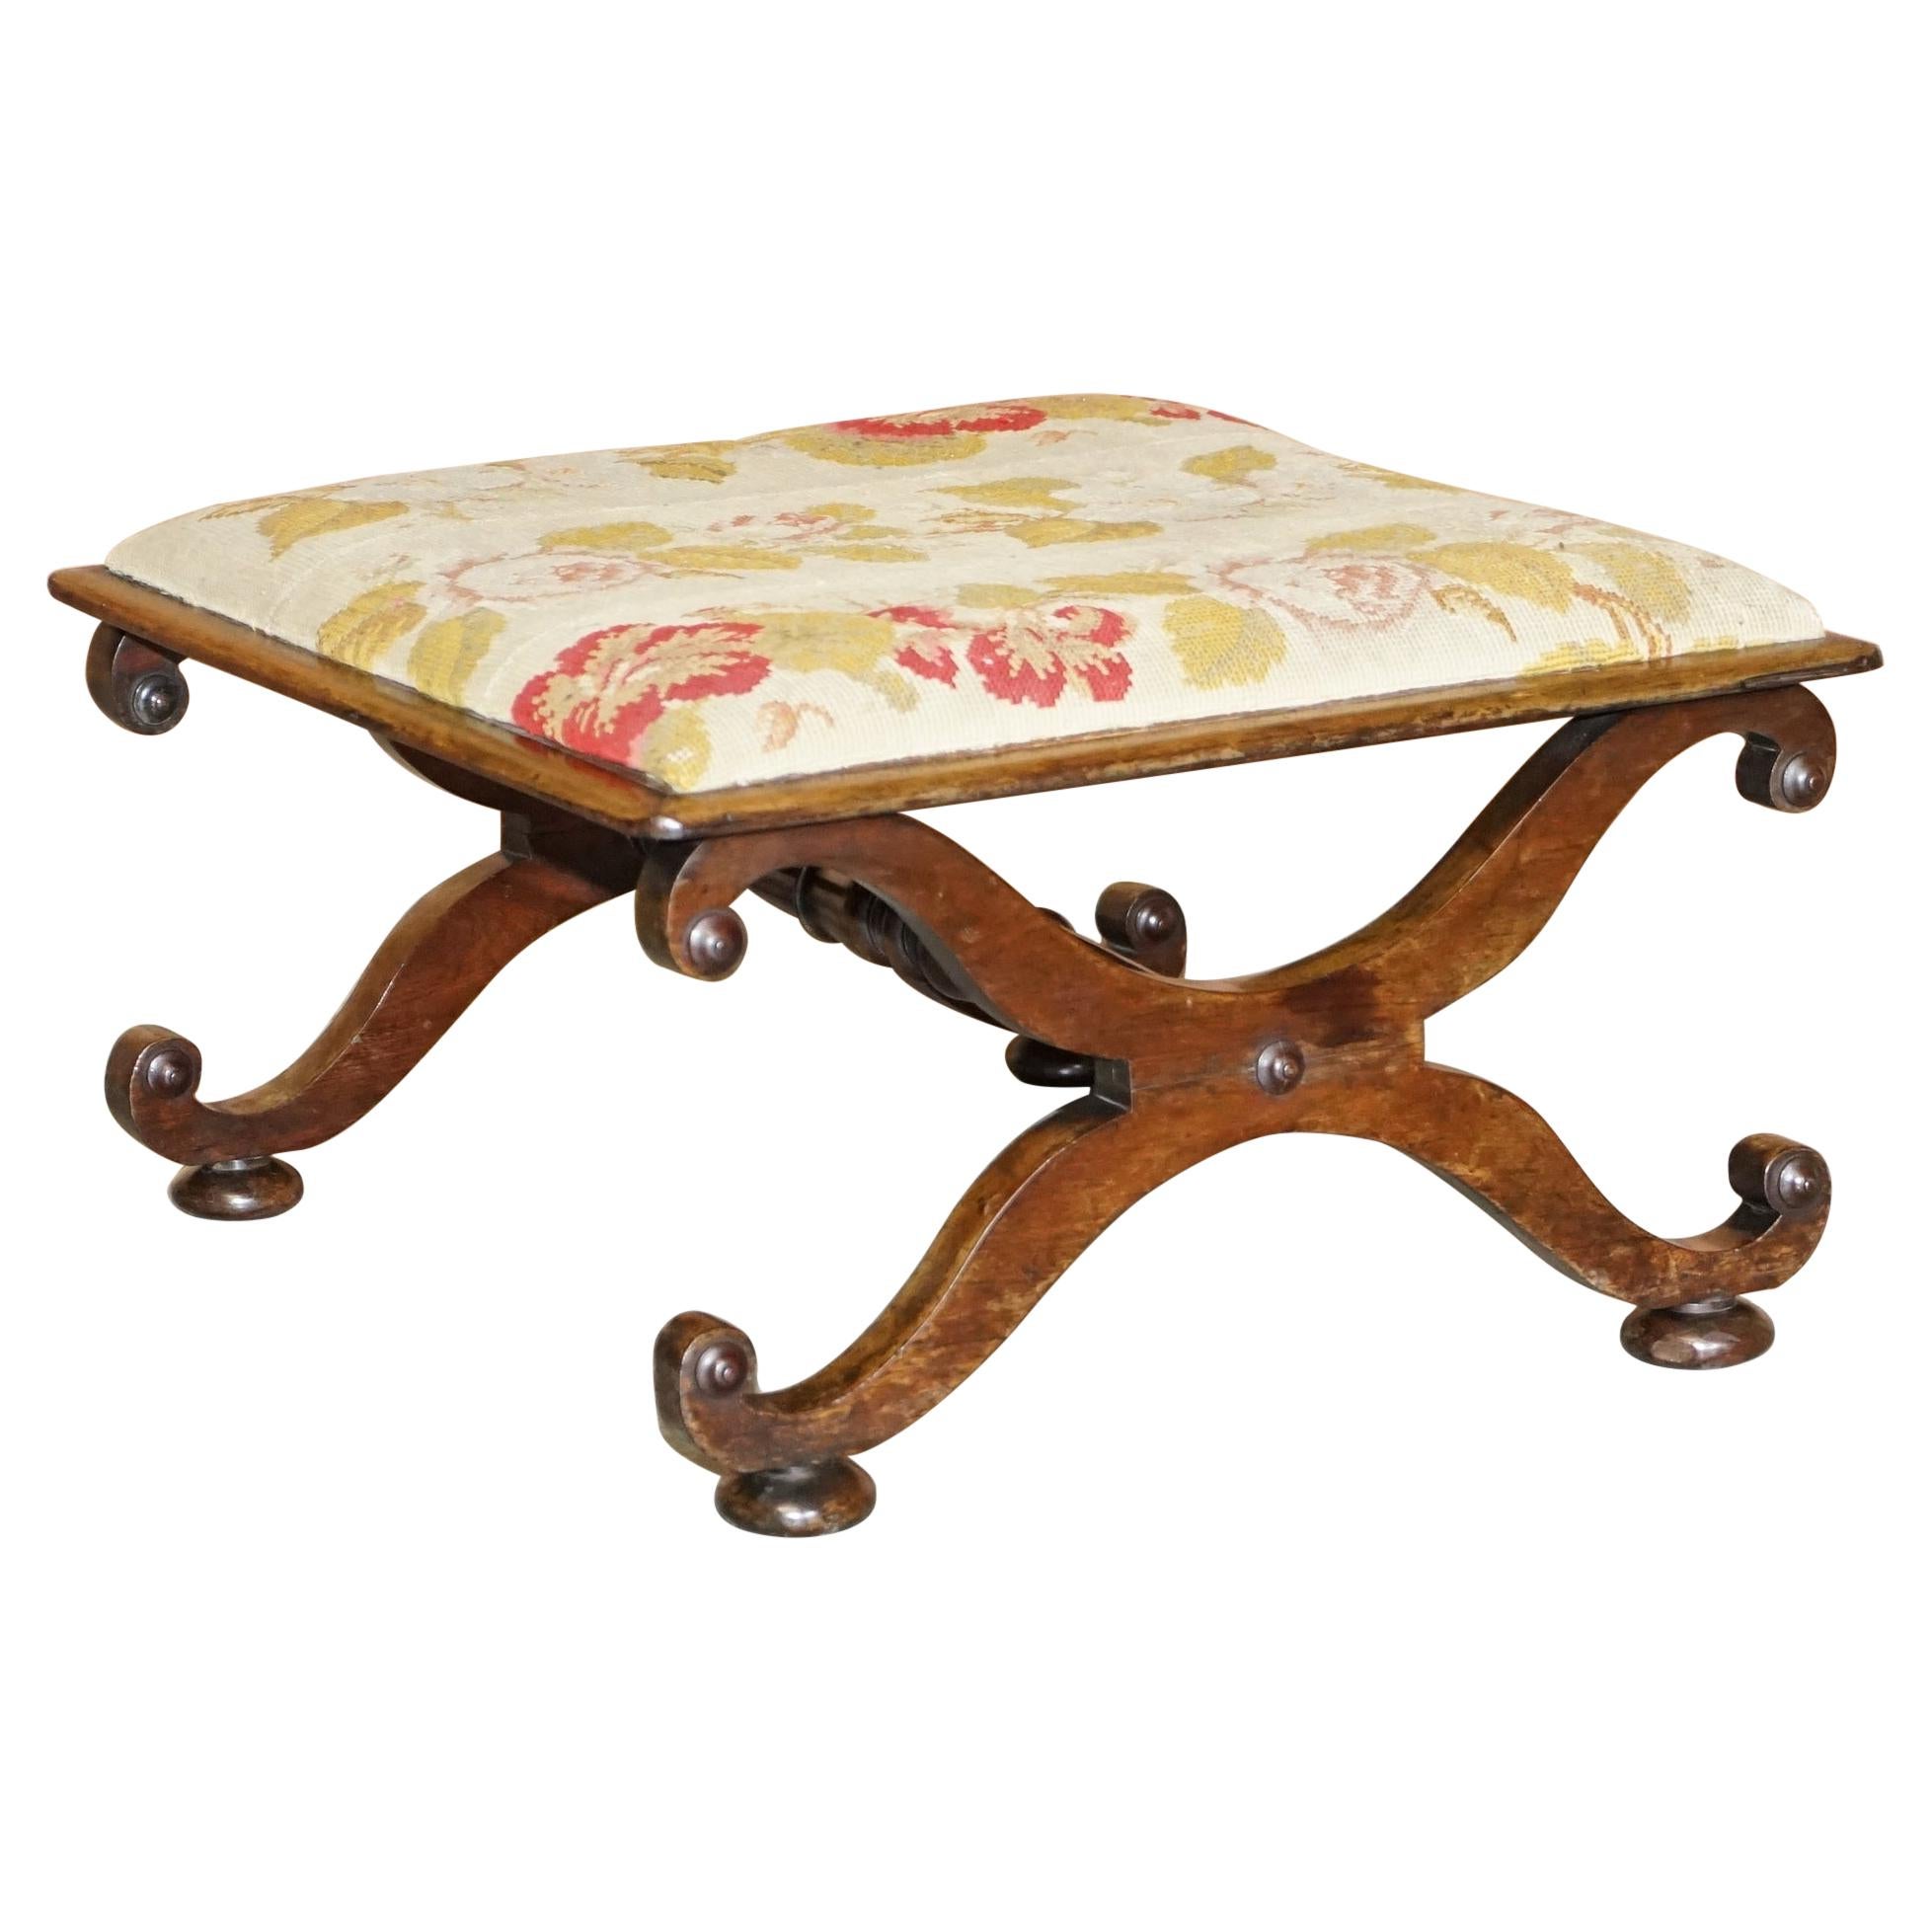 Stunning Victorian Antique William & Mary Style Walnut Embroidered Footstool